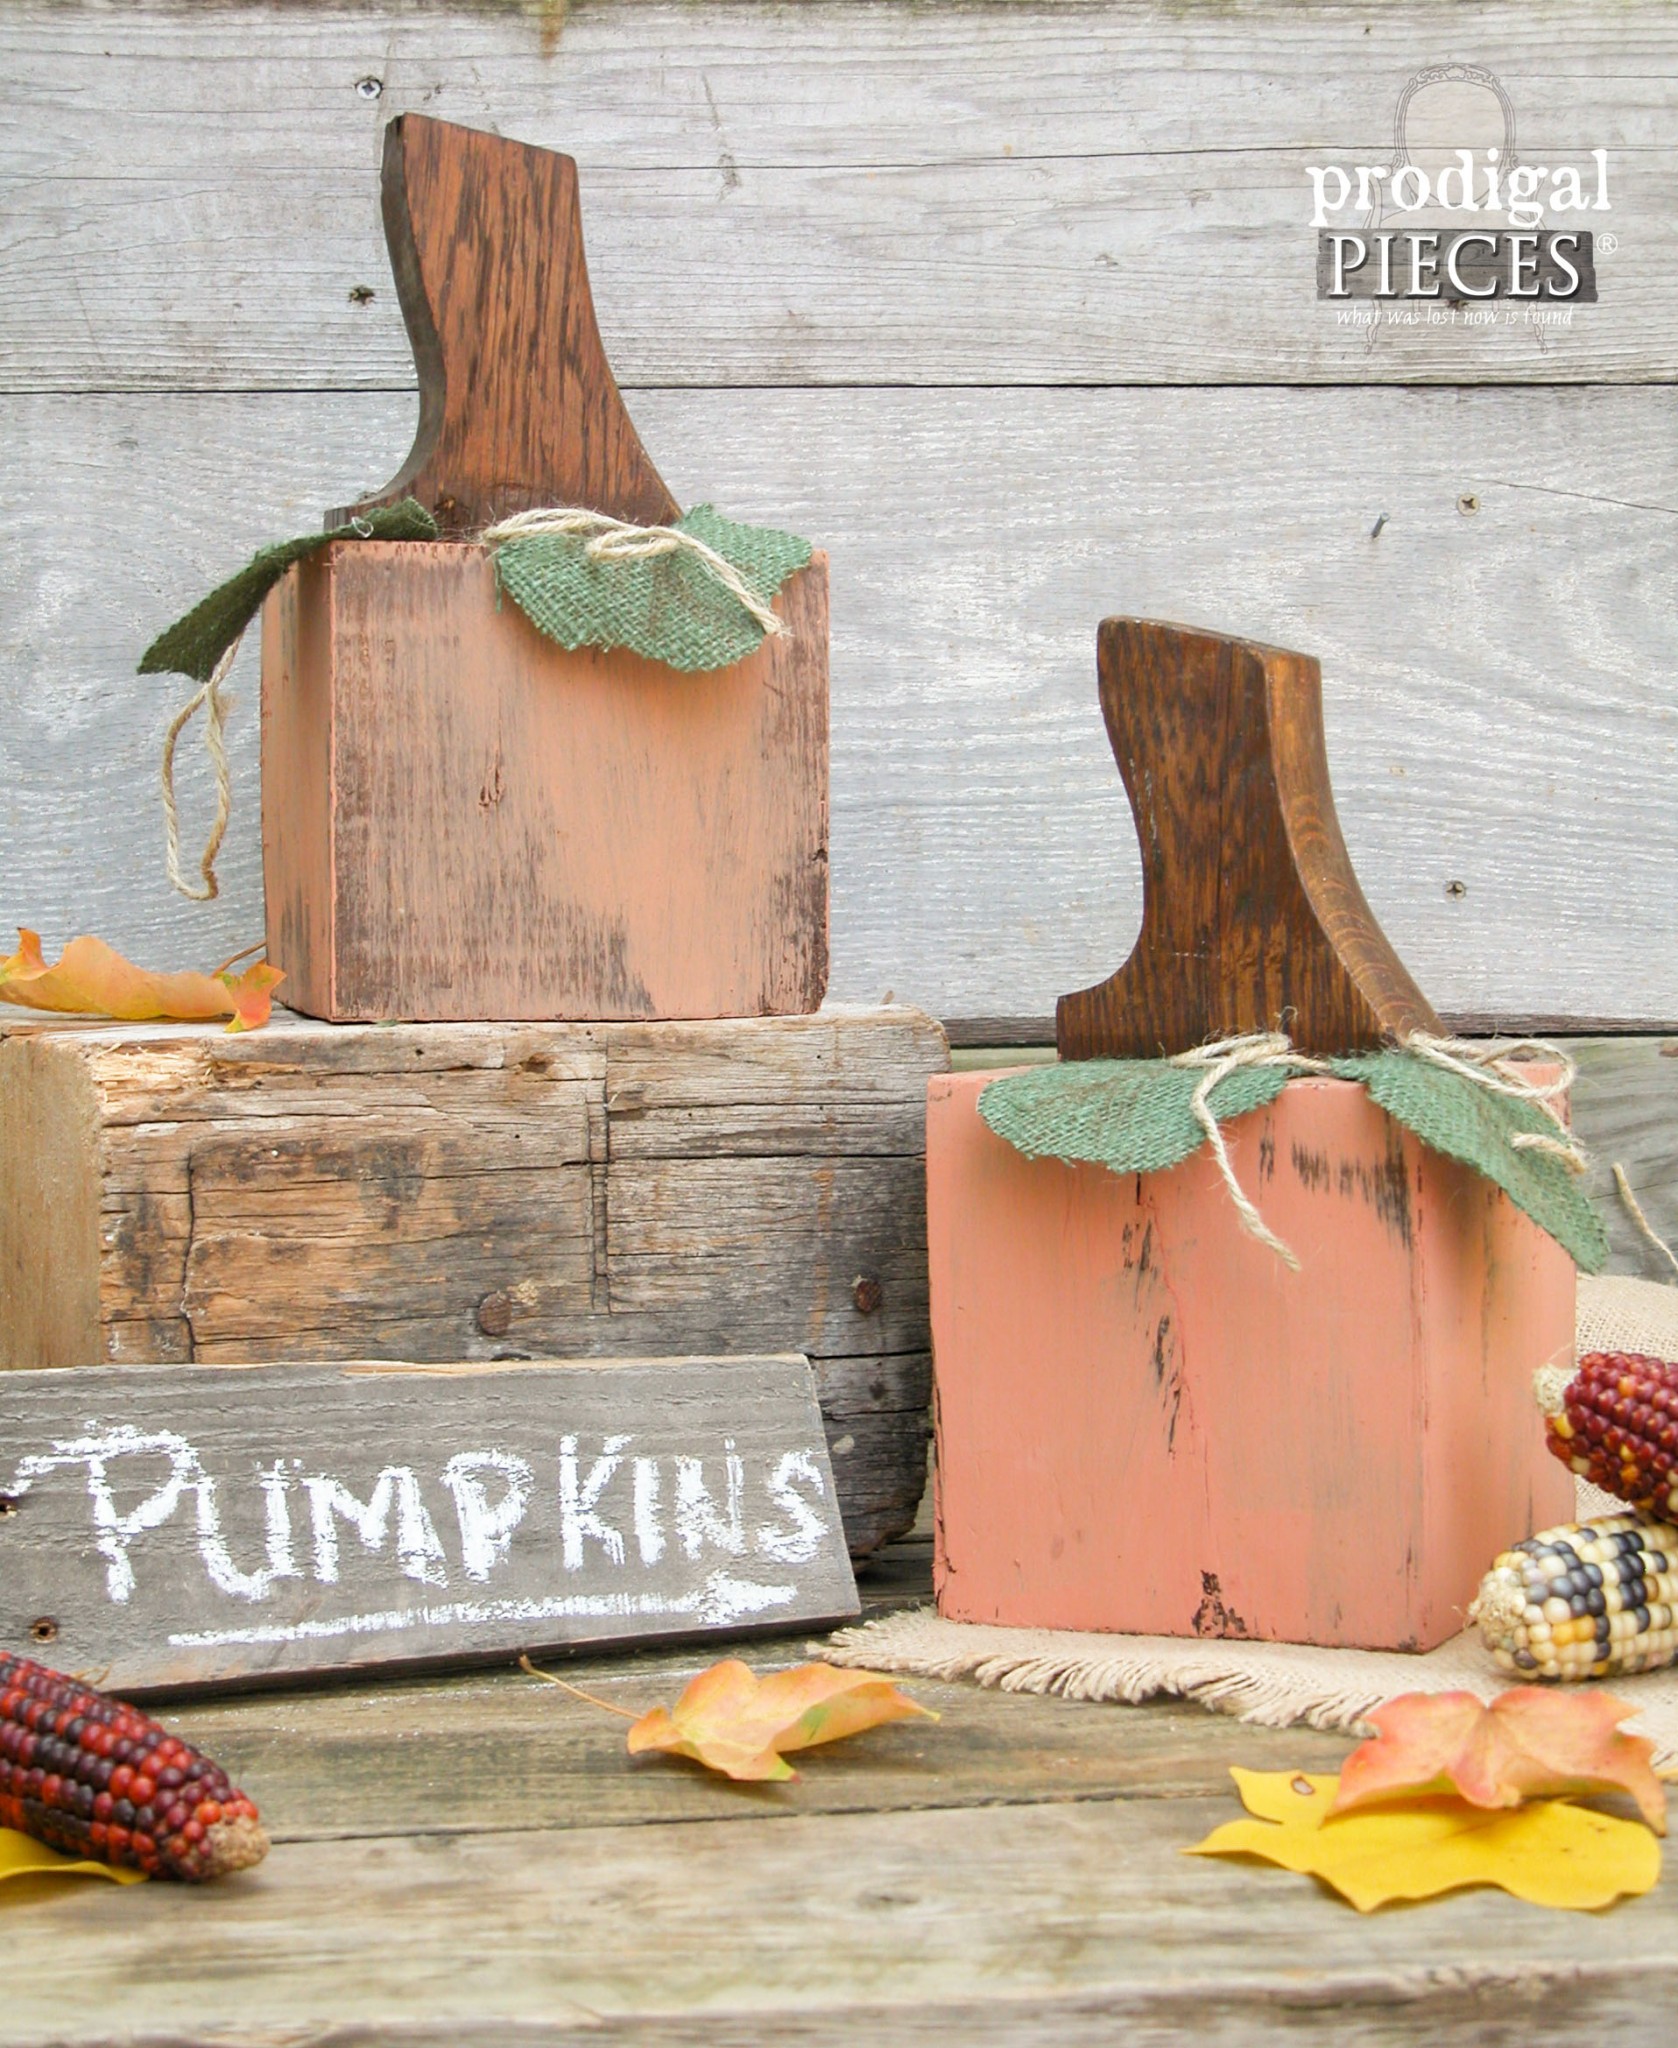 Repurposed Wooden Pumpkins by Prodigal Pieces | www.prodigalpieces.com